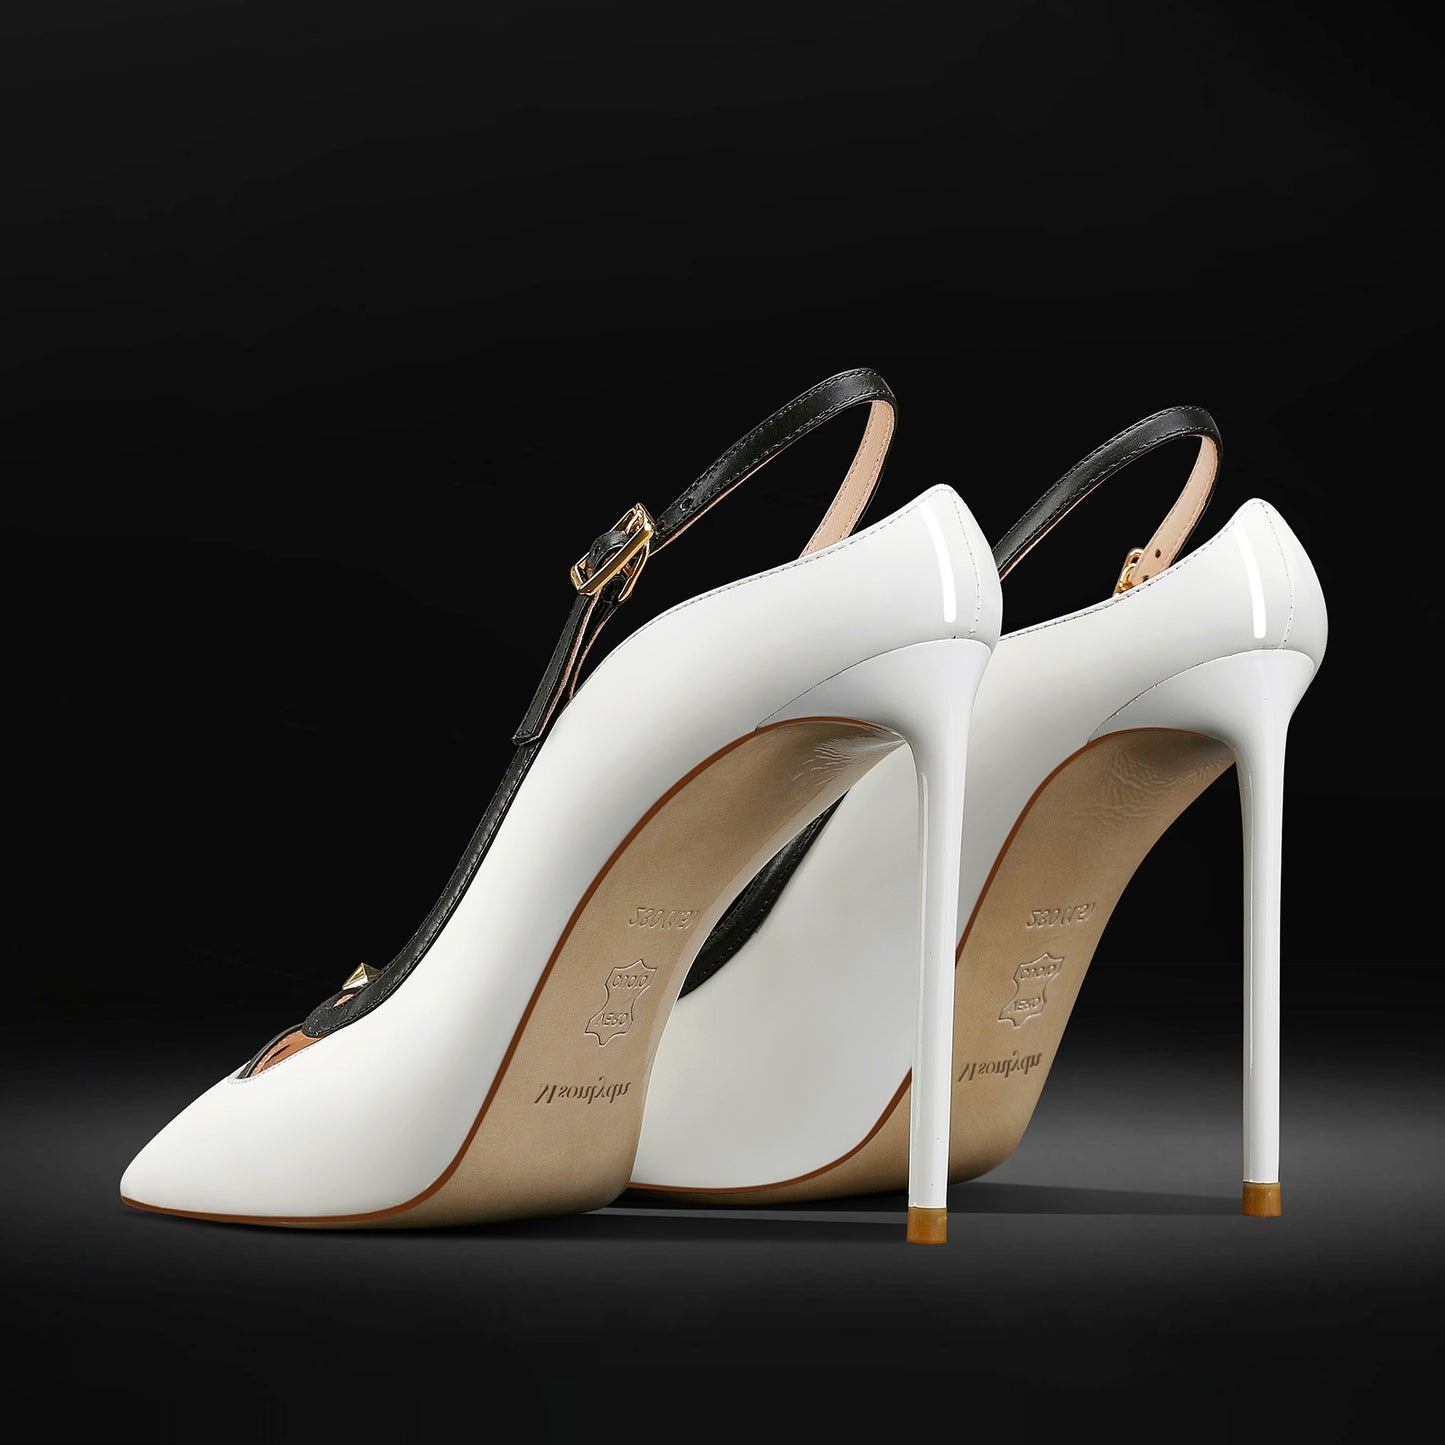 Women's Leather Pointed Toe Stiletto Pumps - High Heels w/Comfortable Ankle Strap & Patent Shine